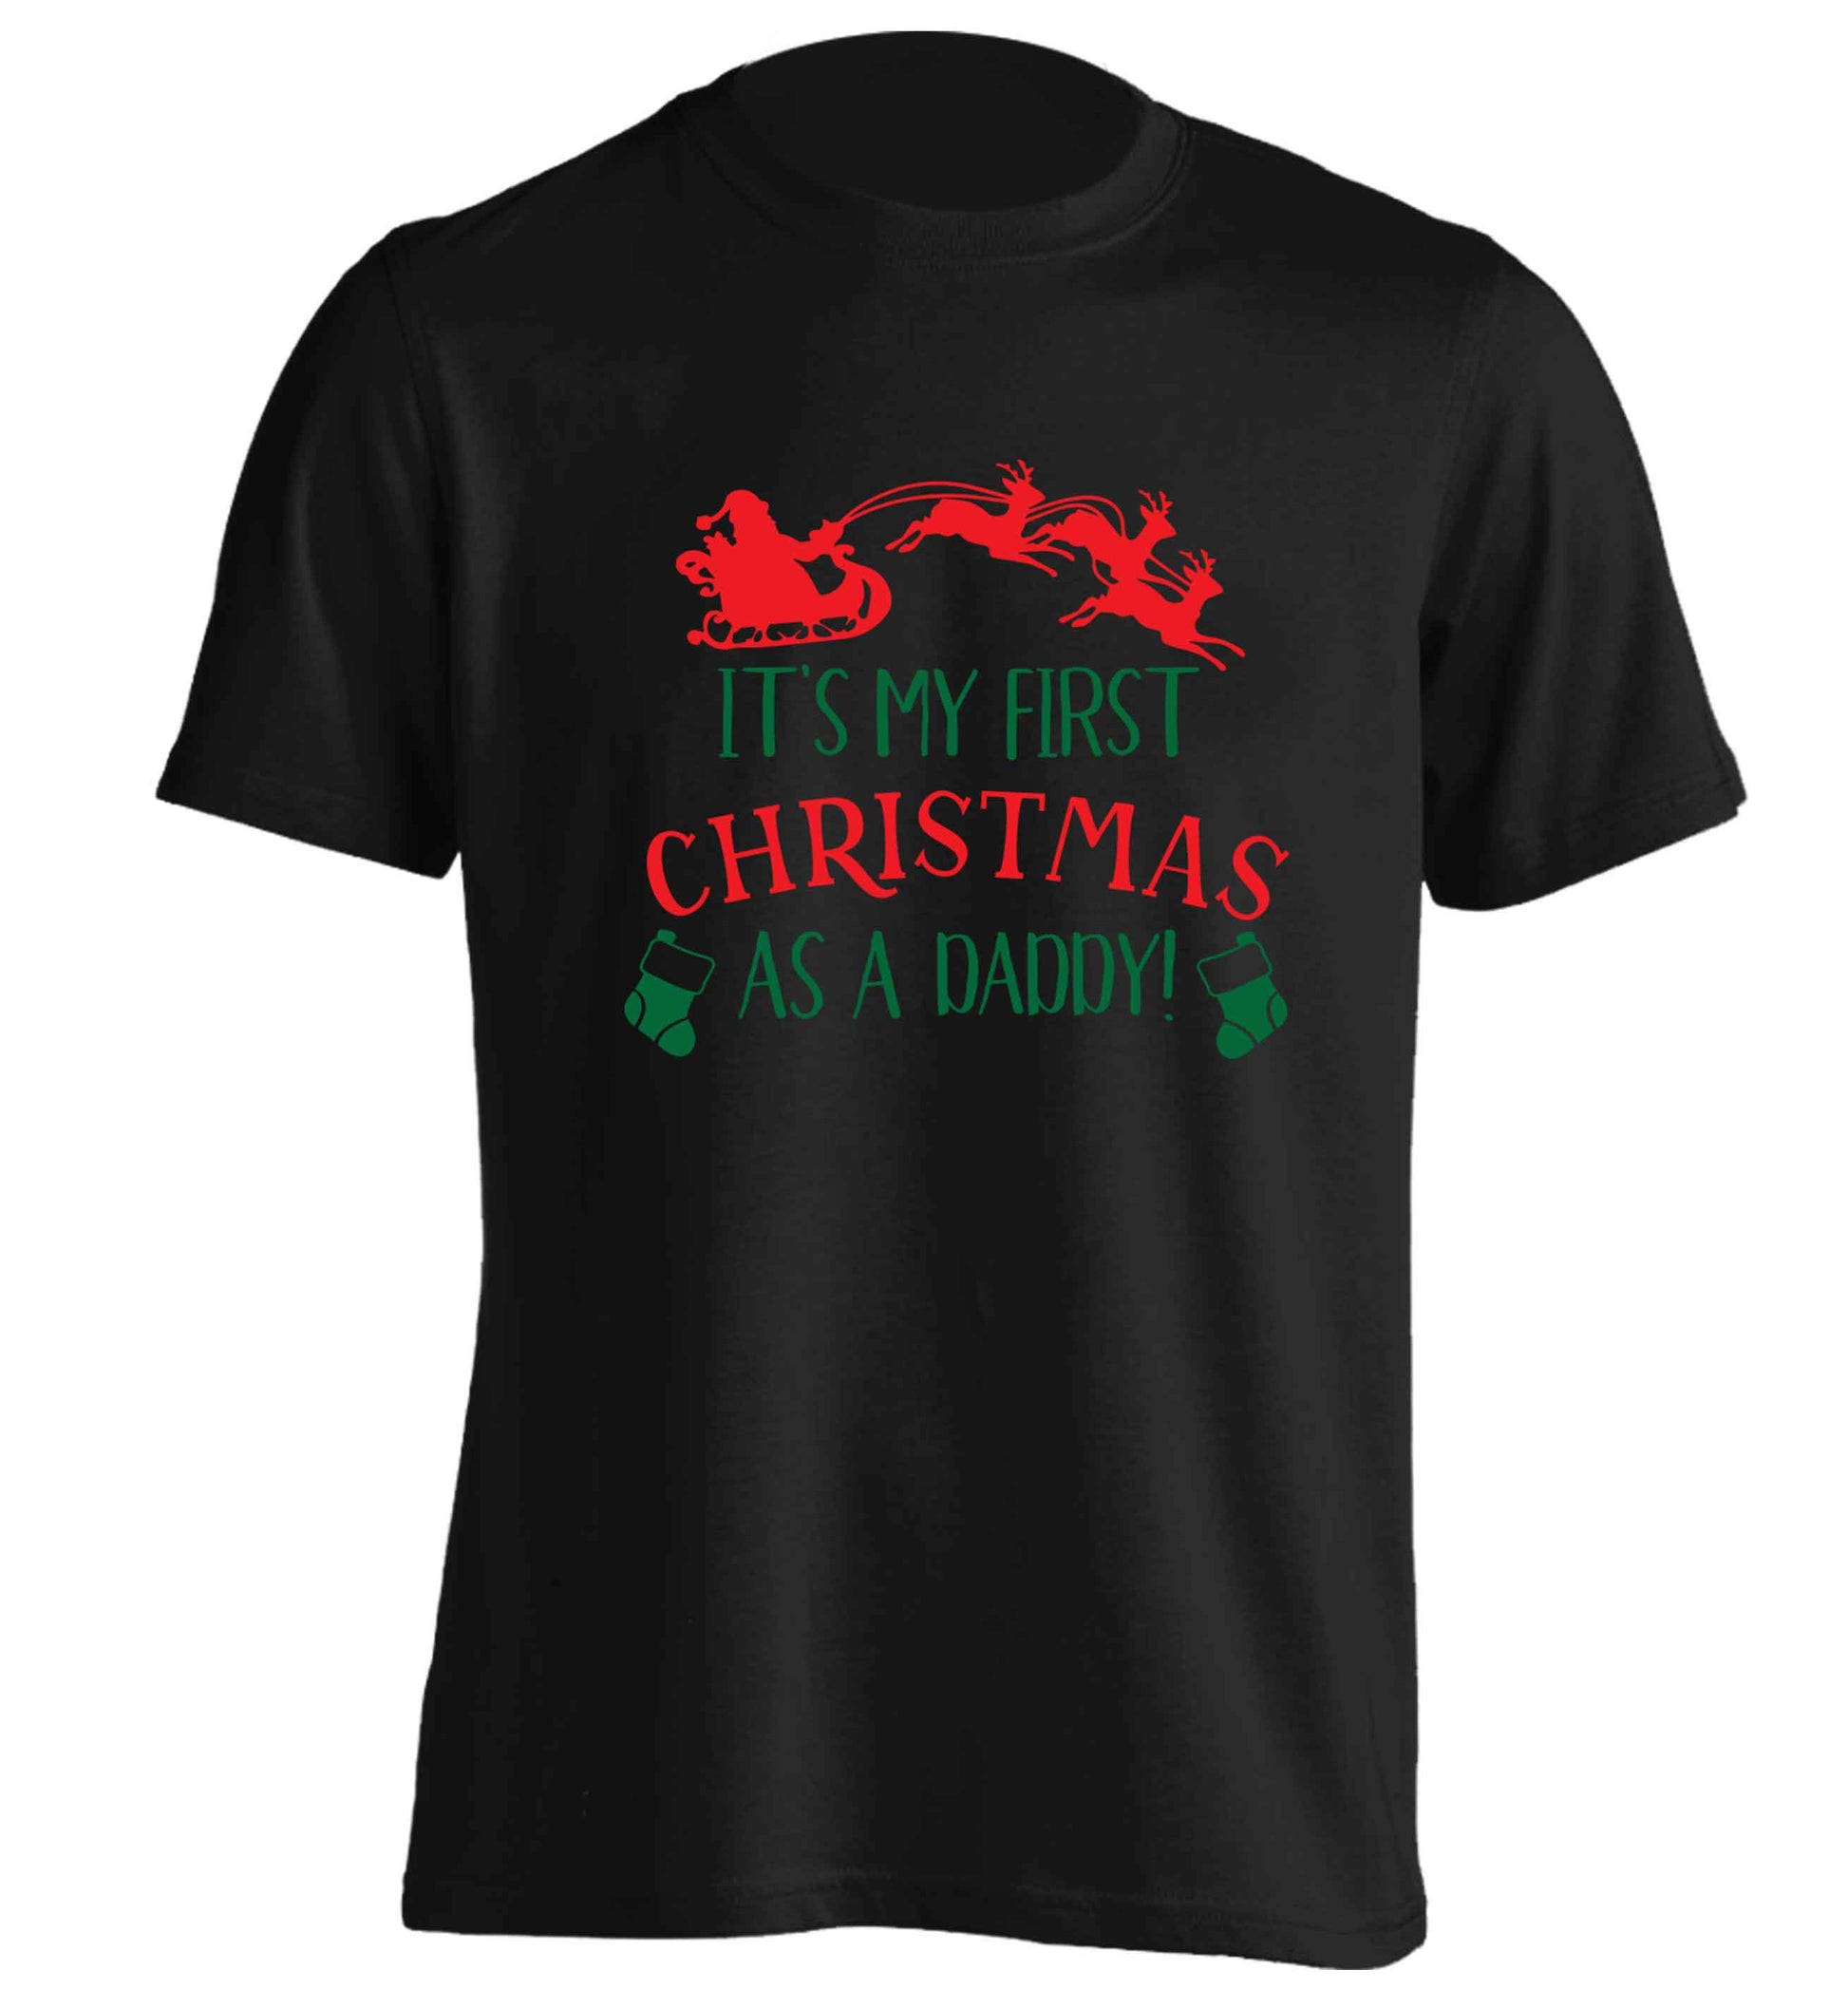 It's my first Christmas as a daddy adults unisex black Tshirt 2XL